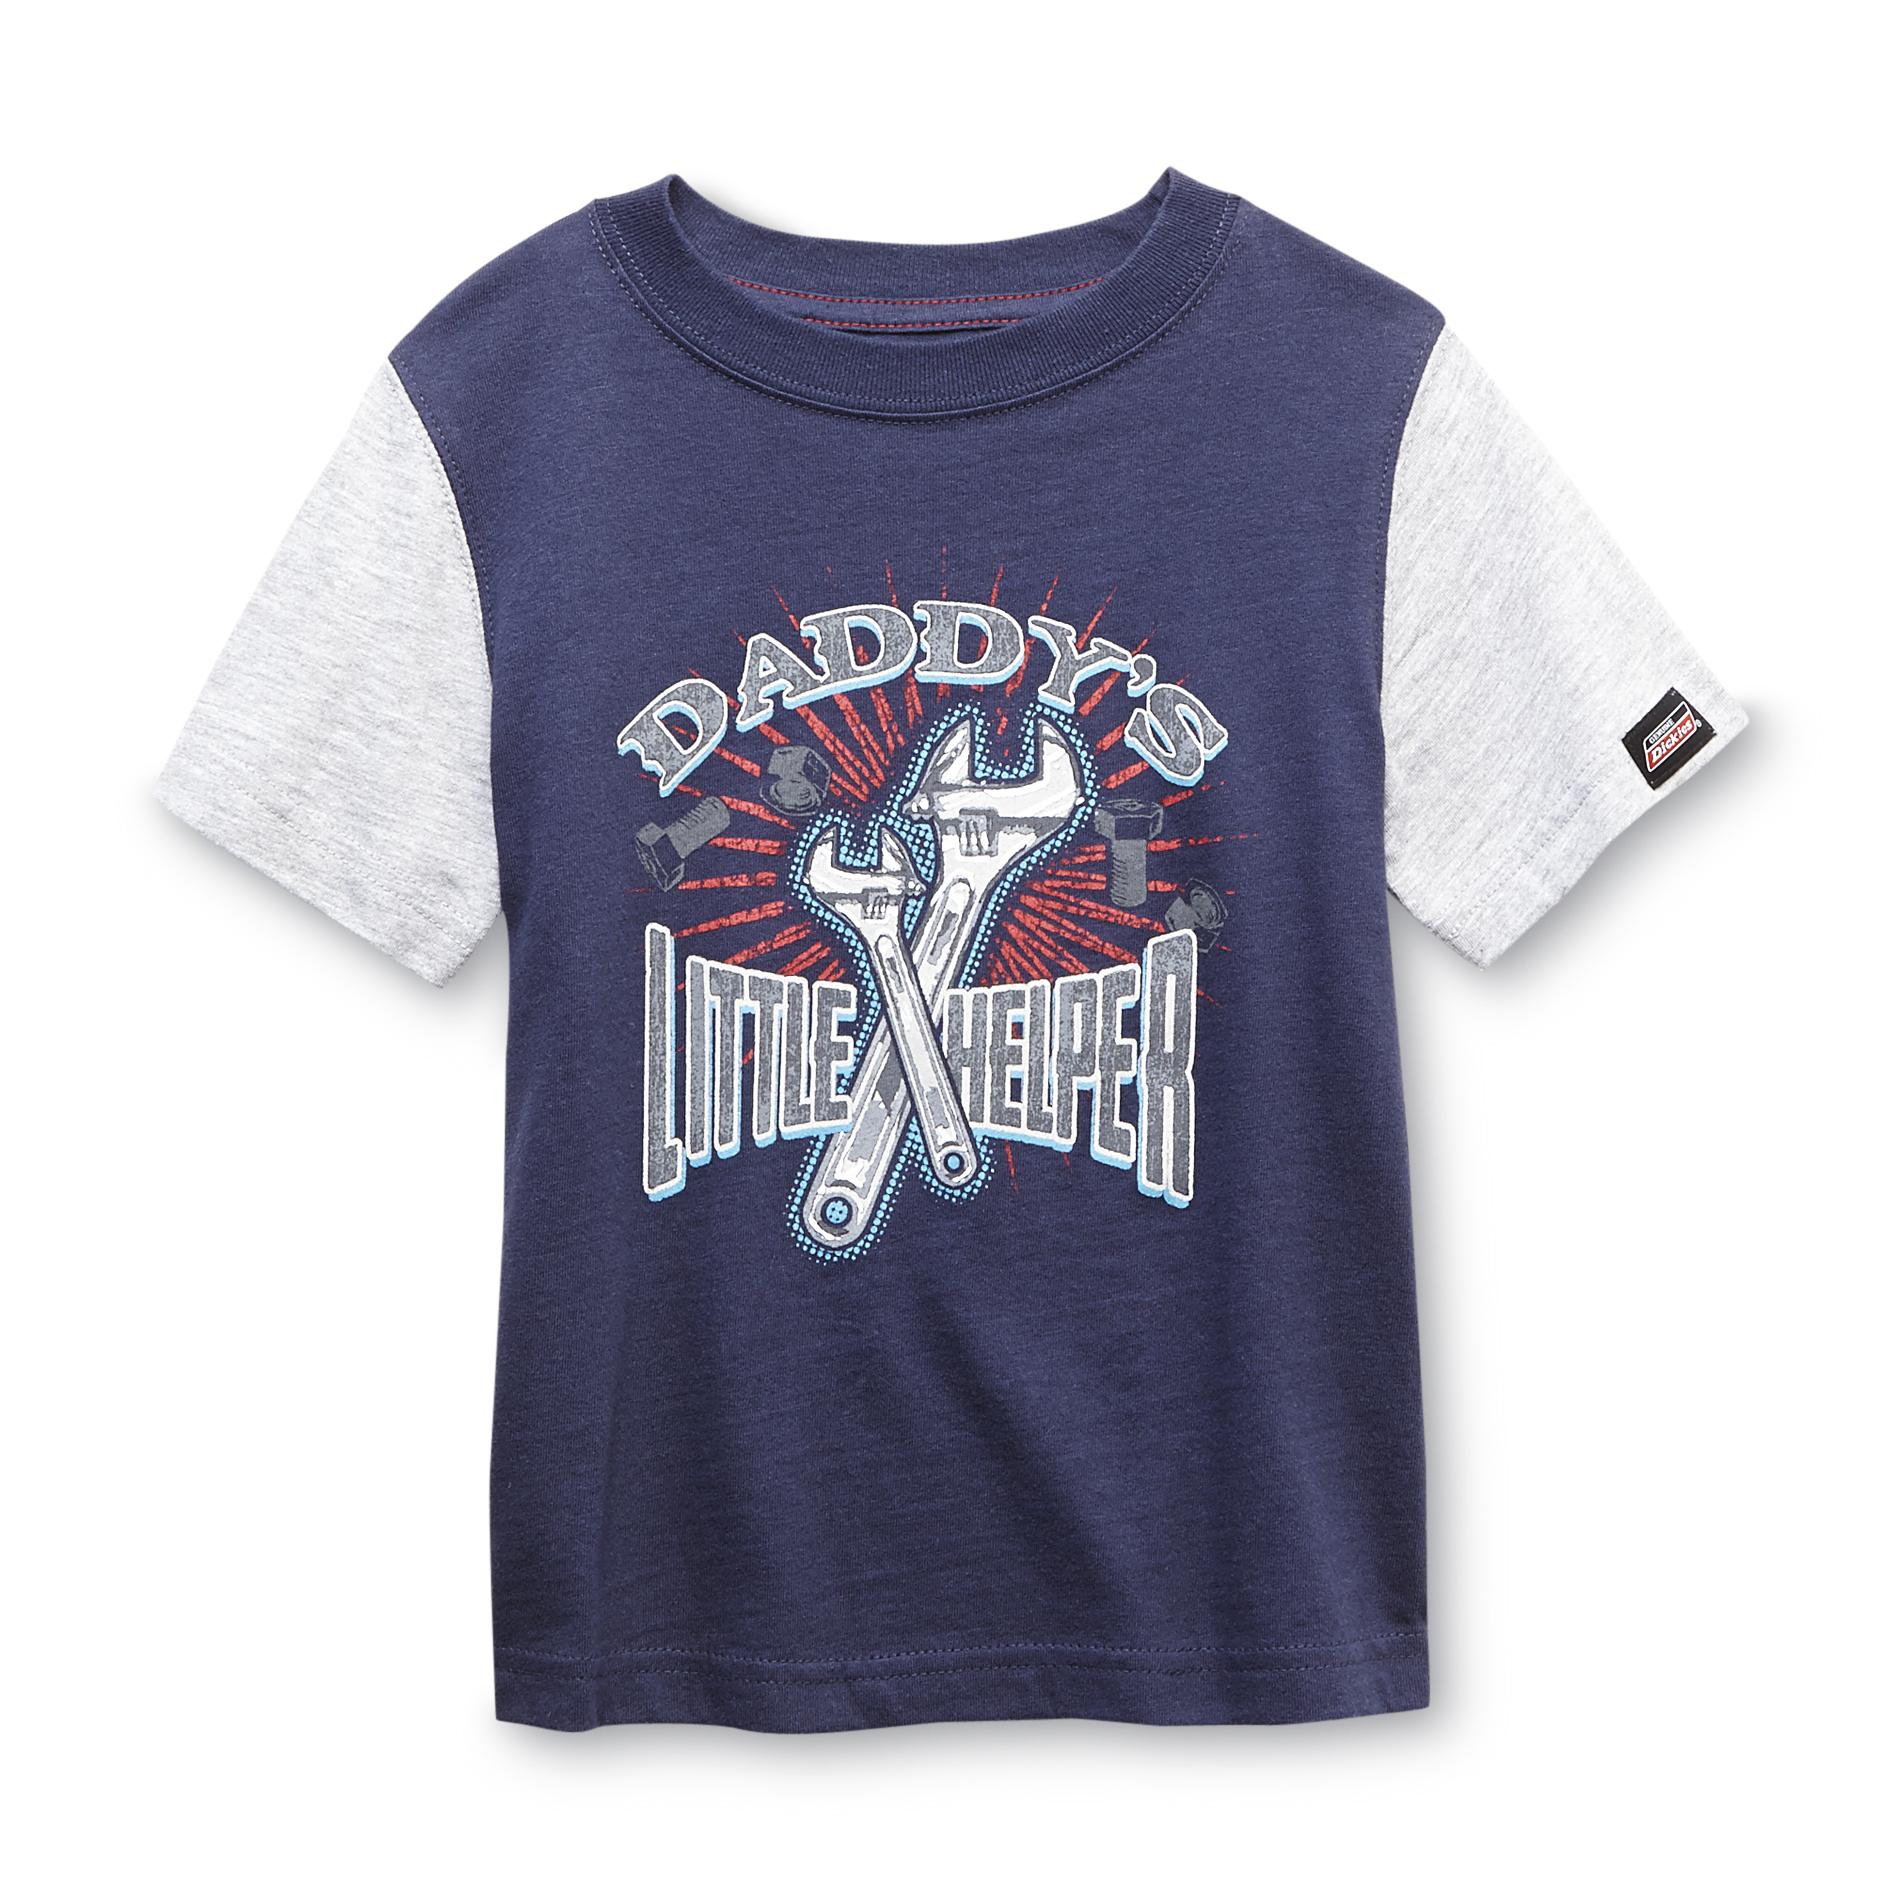 Dickies Infant & Toddler Boy's Graphic T-Shirt - Daddy's Little Helper